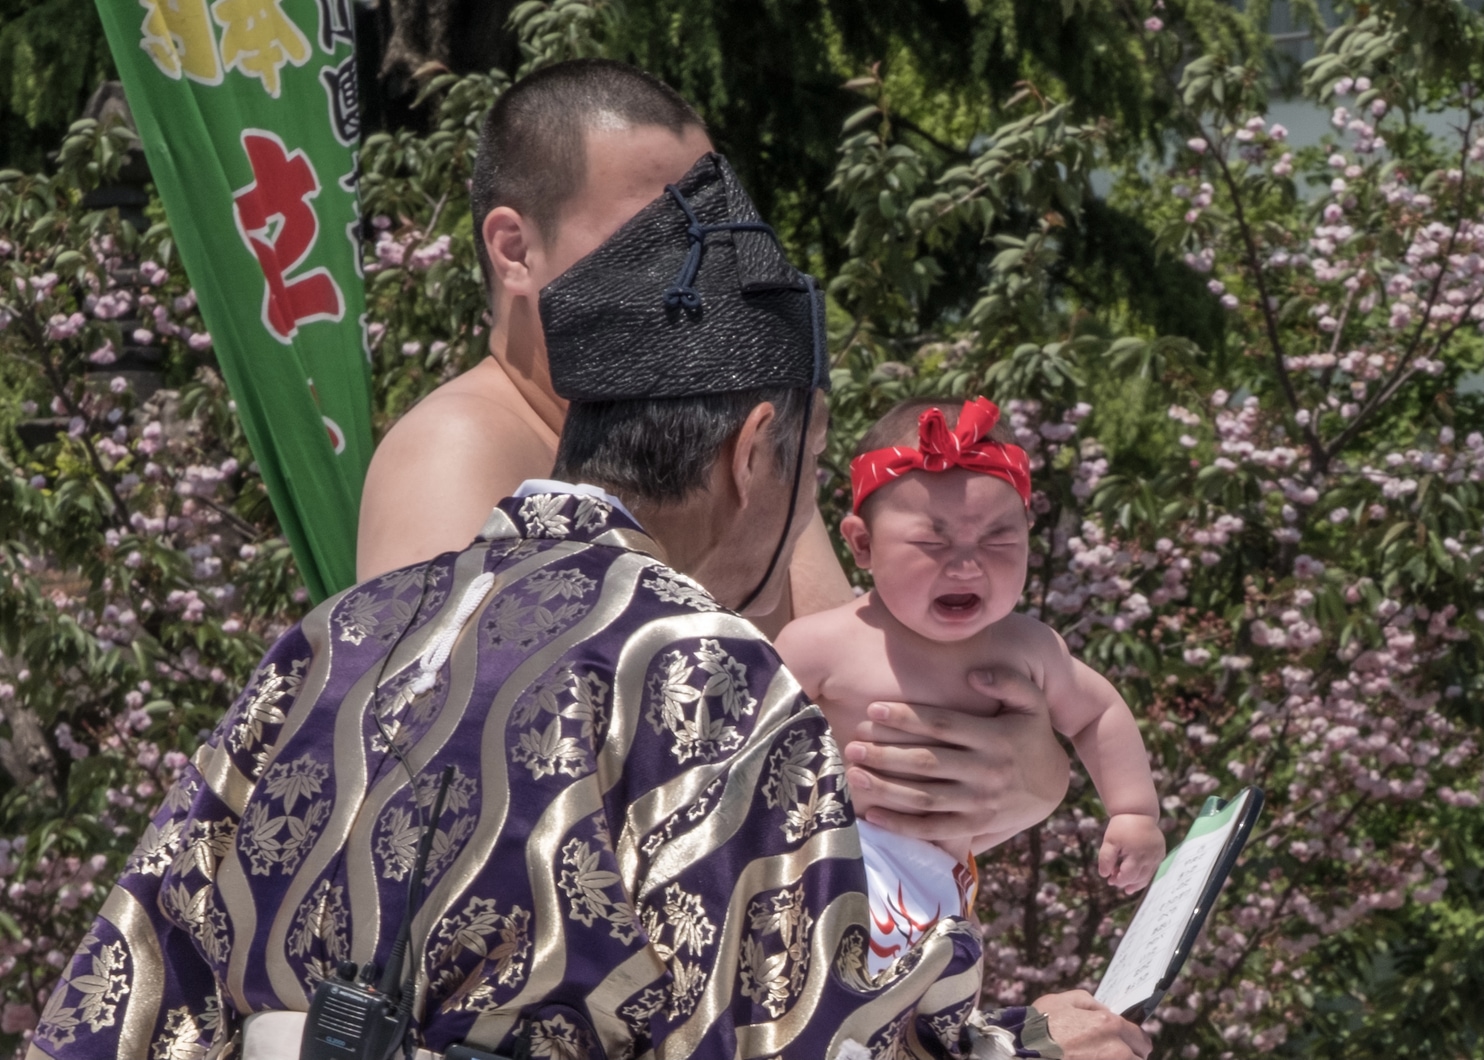 The Nakizumo Festival: An Event Where Crying Babies Are a Good Thing